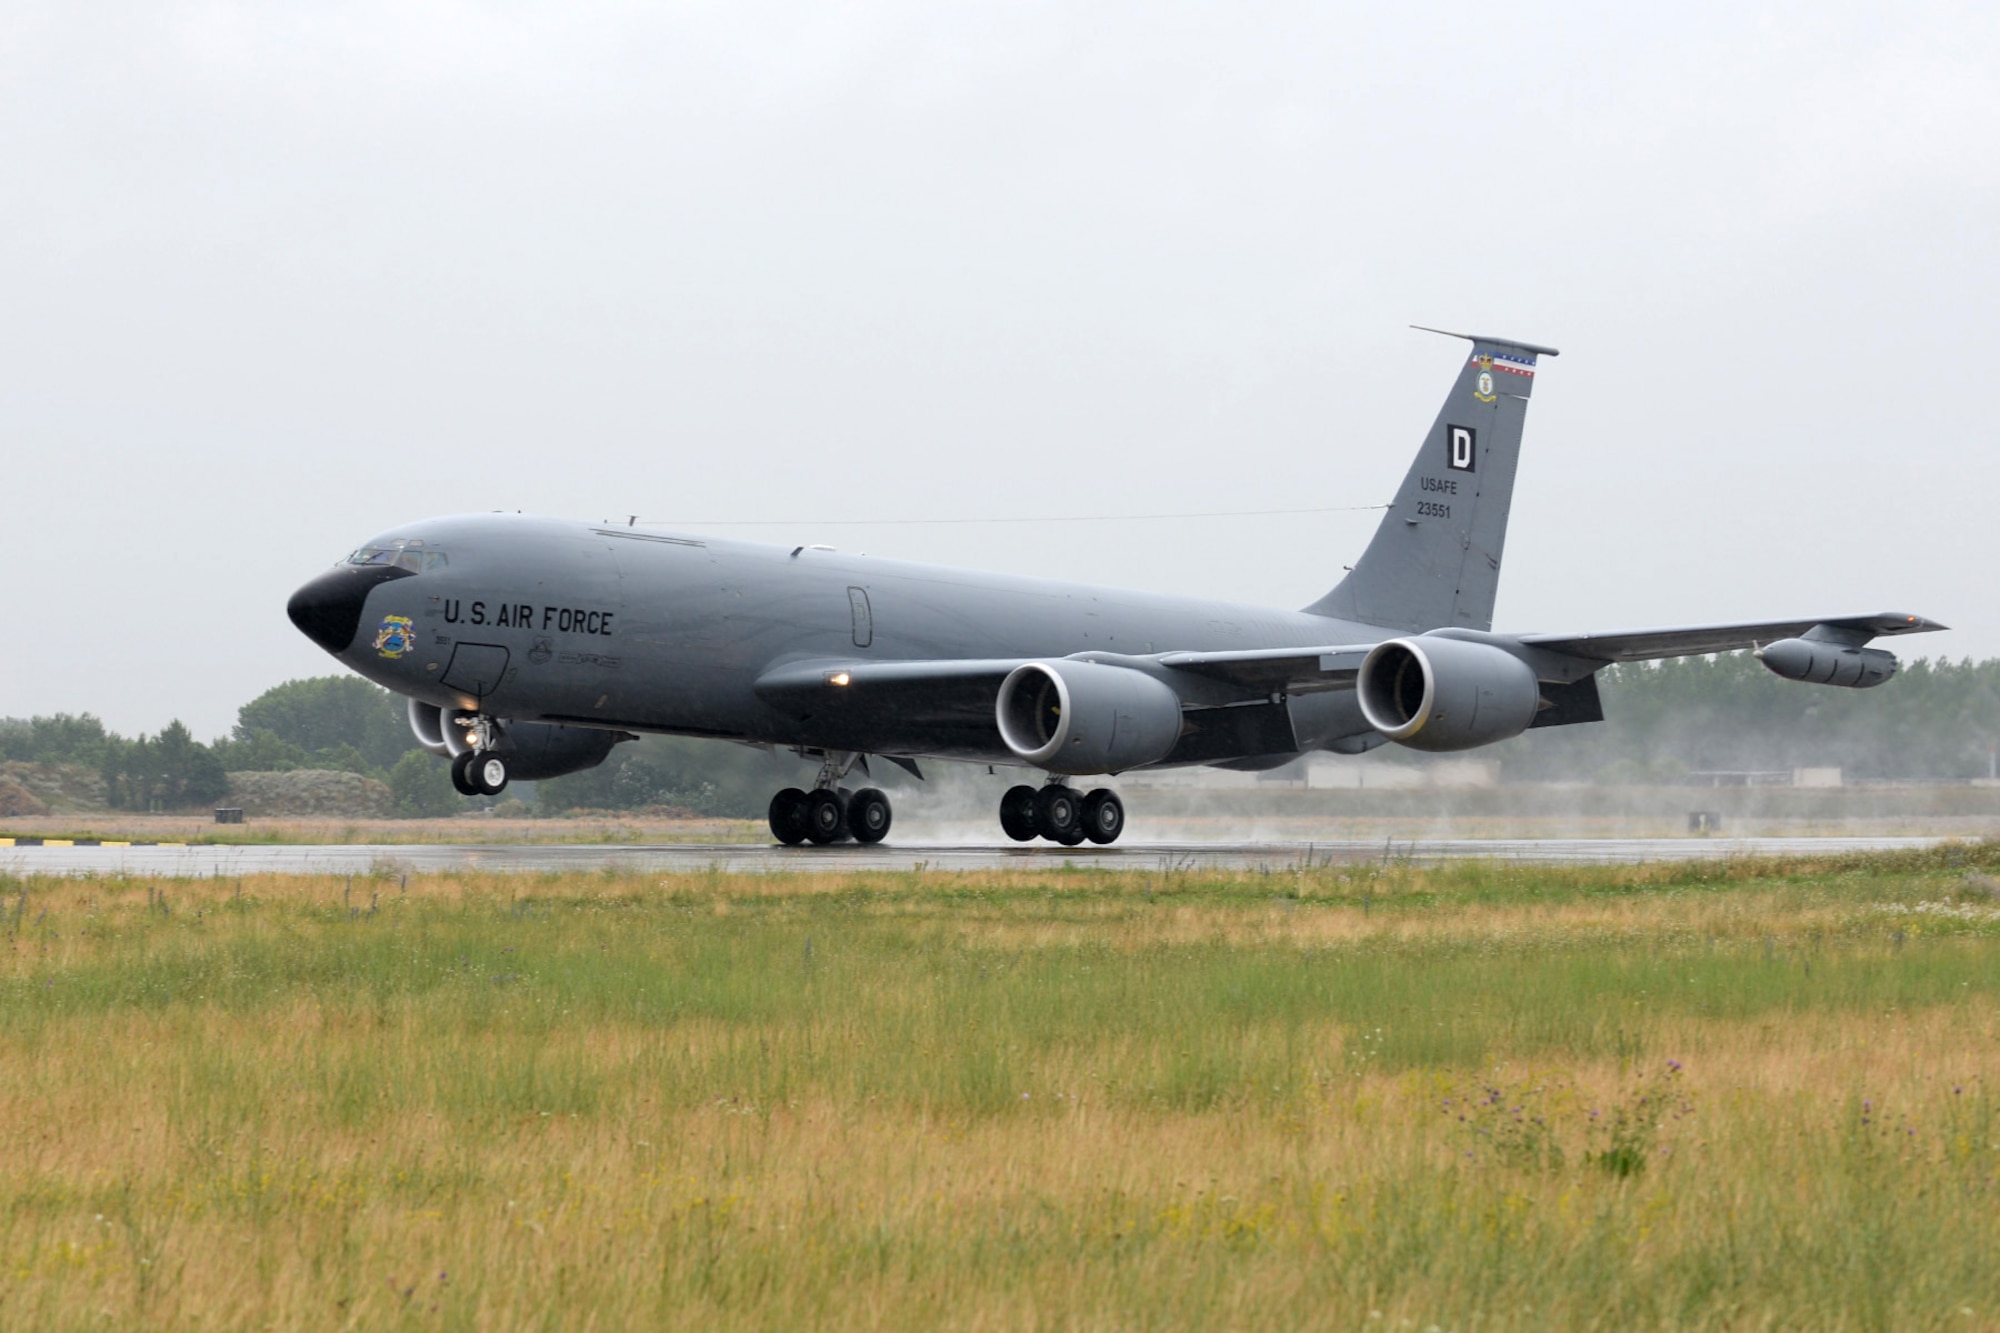 A U.S. Air Force KC-135 Stratotanker lands June 24, 2015, during air refueling familiarization training on Kecskemét air base, Hungary. Hungarian, U.S. and Swedish air force personnel met for a two-week familiarization period enabling the Hungarian JAS-39 Gripen pilots to successfully perform air refueling for the first time. (U.S. Air Force photo by Senior Airman Kate Thornton/Released)